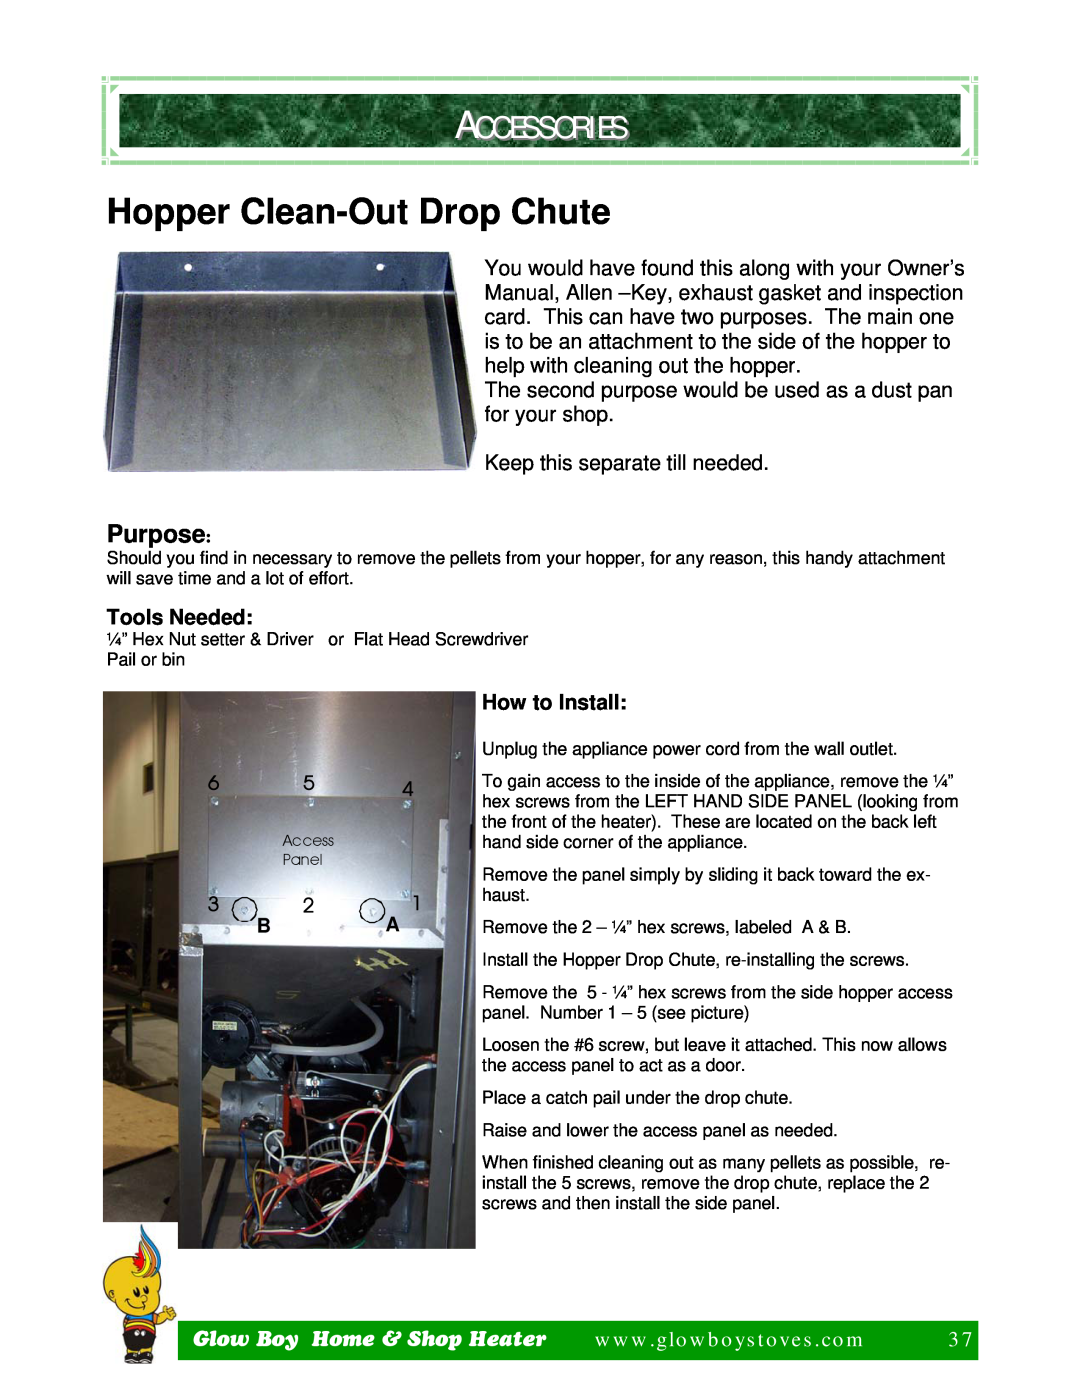 Dansons Group CCGB 1, CCGB 2 manual Accessories, Purpose, Tools Needed, How to Install, Hopper Clean-OutDrop Chute 